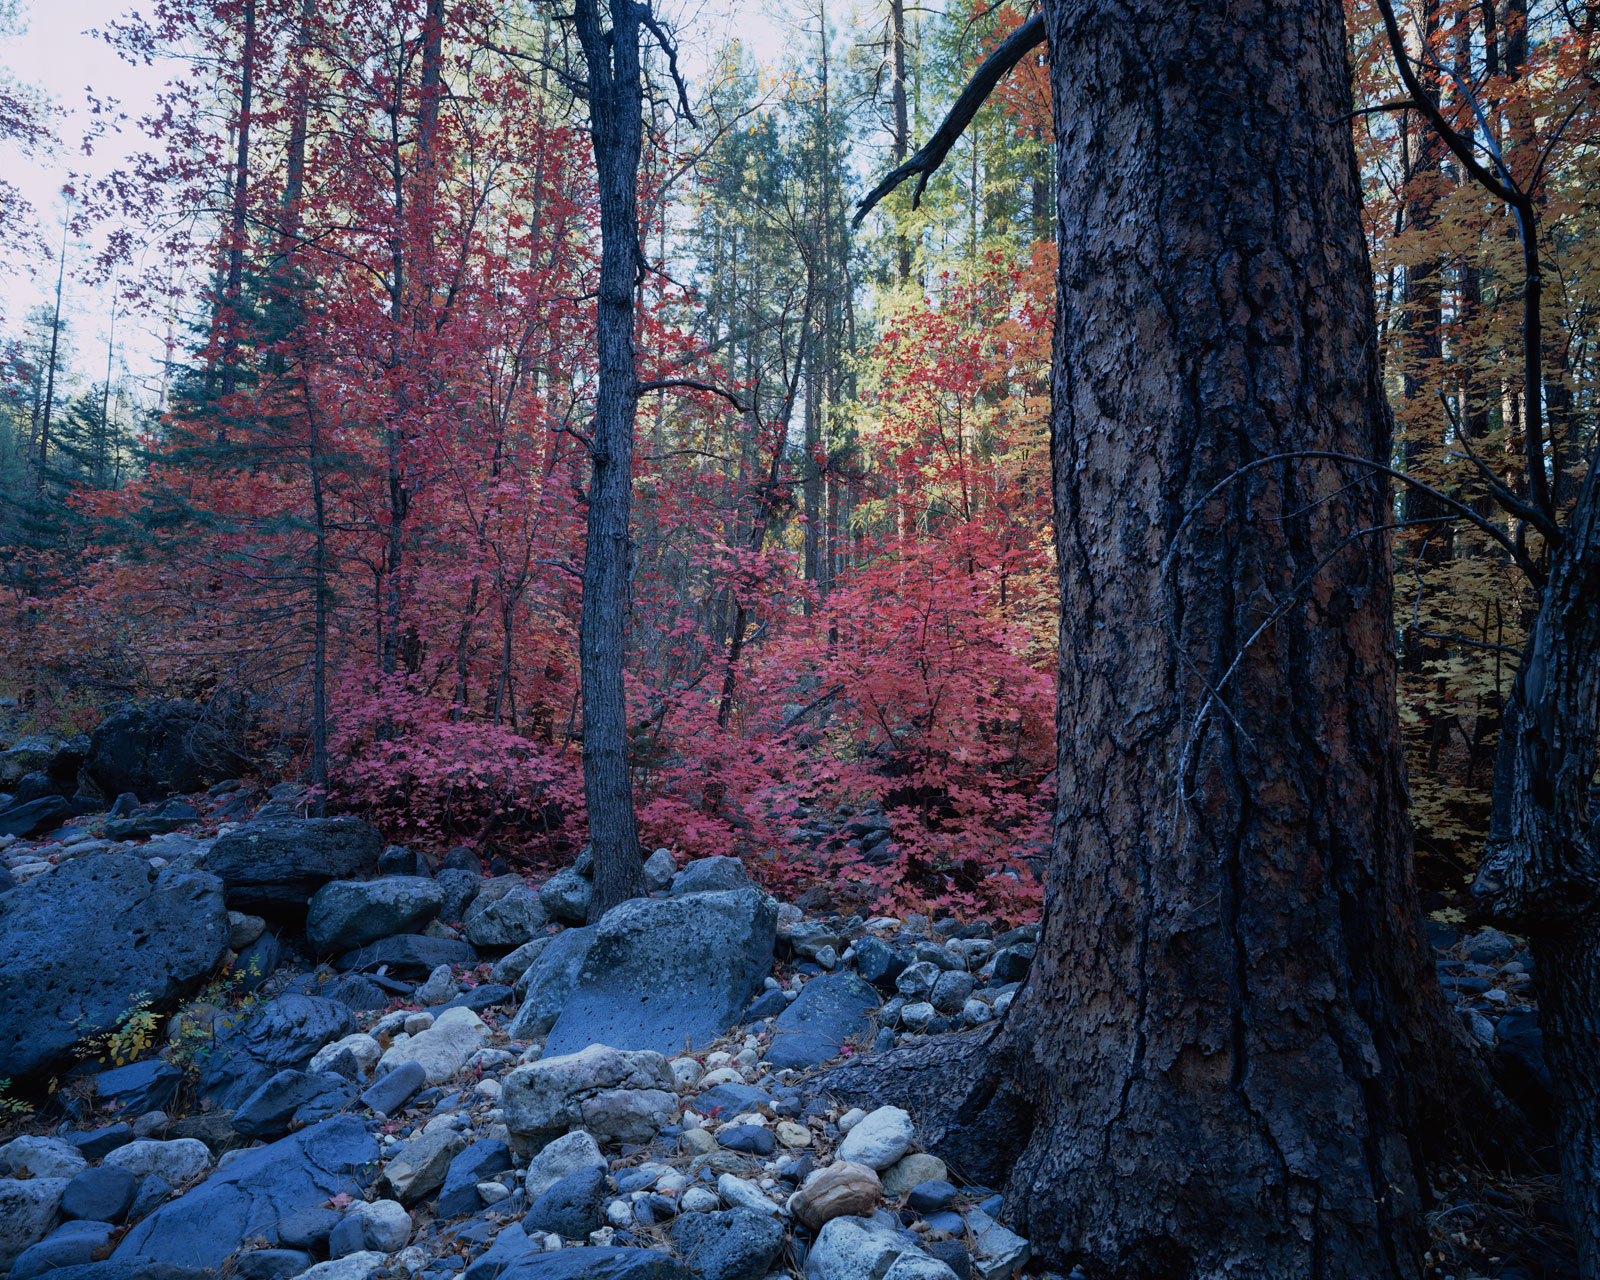 Fall leaves on the Maples, with a Pine tree trunk in the right foreground, near Cave Springs in Oak Creek Canyon